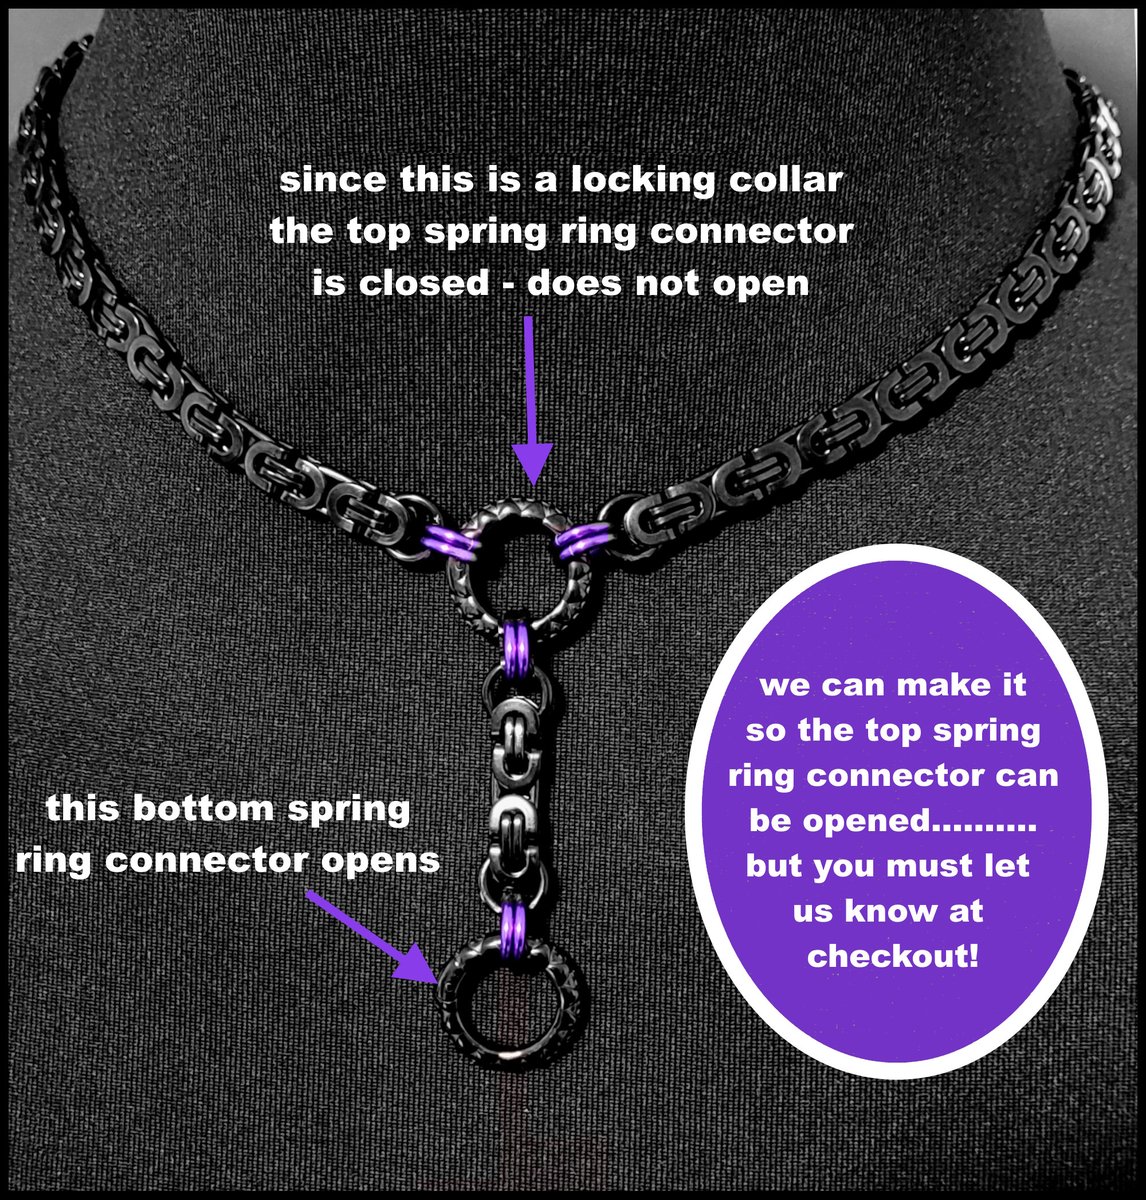 #StainlessSteel #borobudur Midnight Purple Passion Locking Discreet Day Collar and Drop Chain w/Black Stainless Steel Byzantine Chain
$155.00
Get here etsy.com/listing/166197…